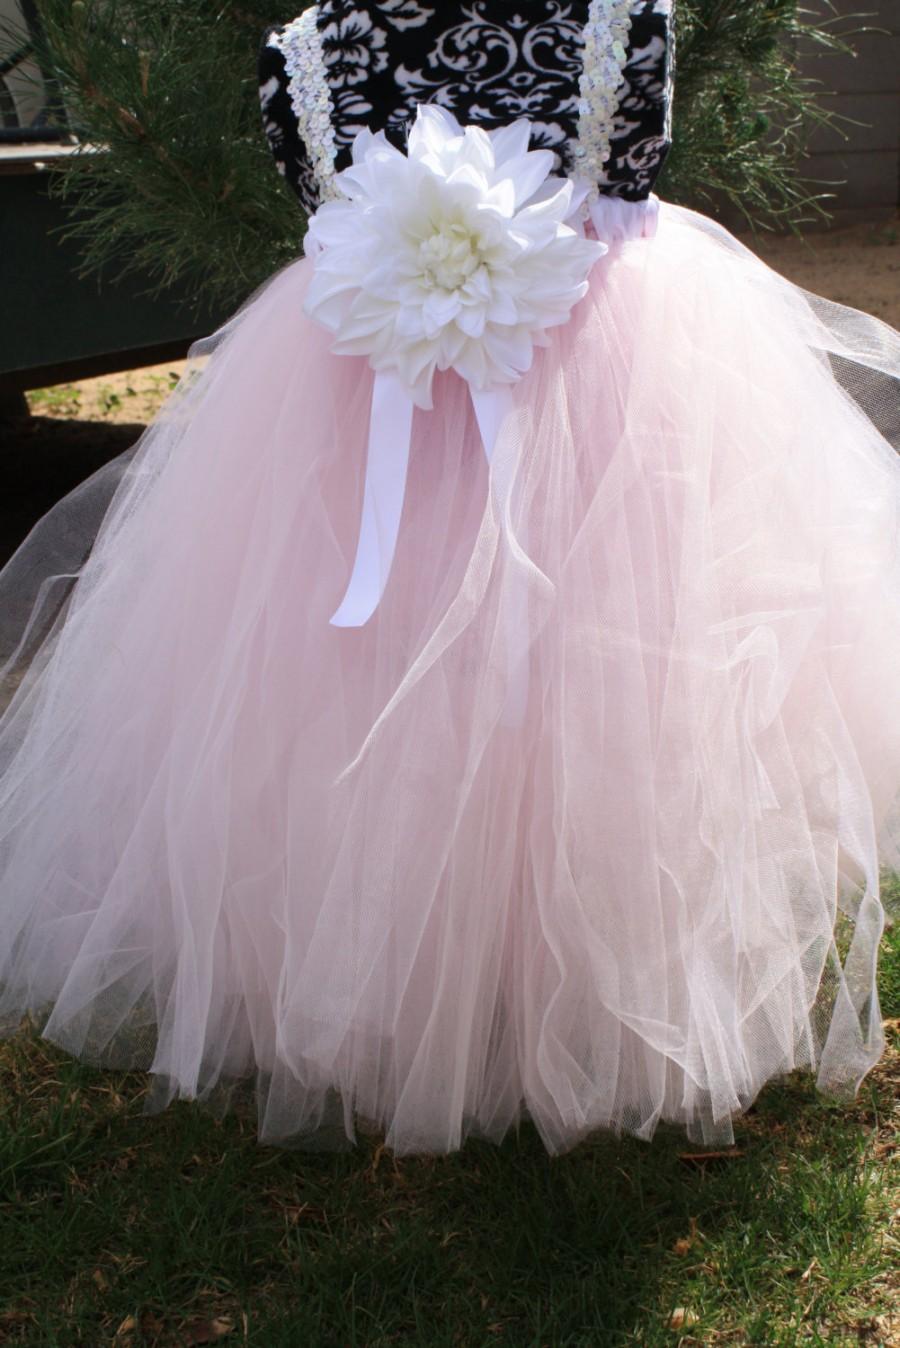 Wedding - Pink Flower girl dress "Cotton Candy" Weddings, easter, photoprop, birthday, pageant SEWN tutu, tulle dress